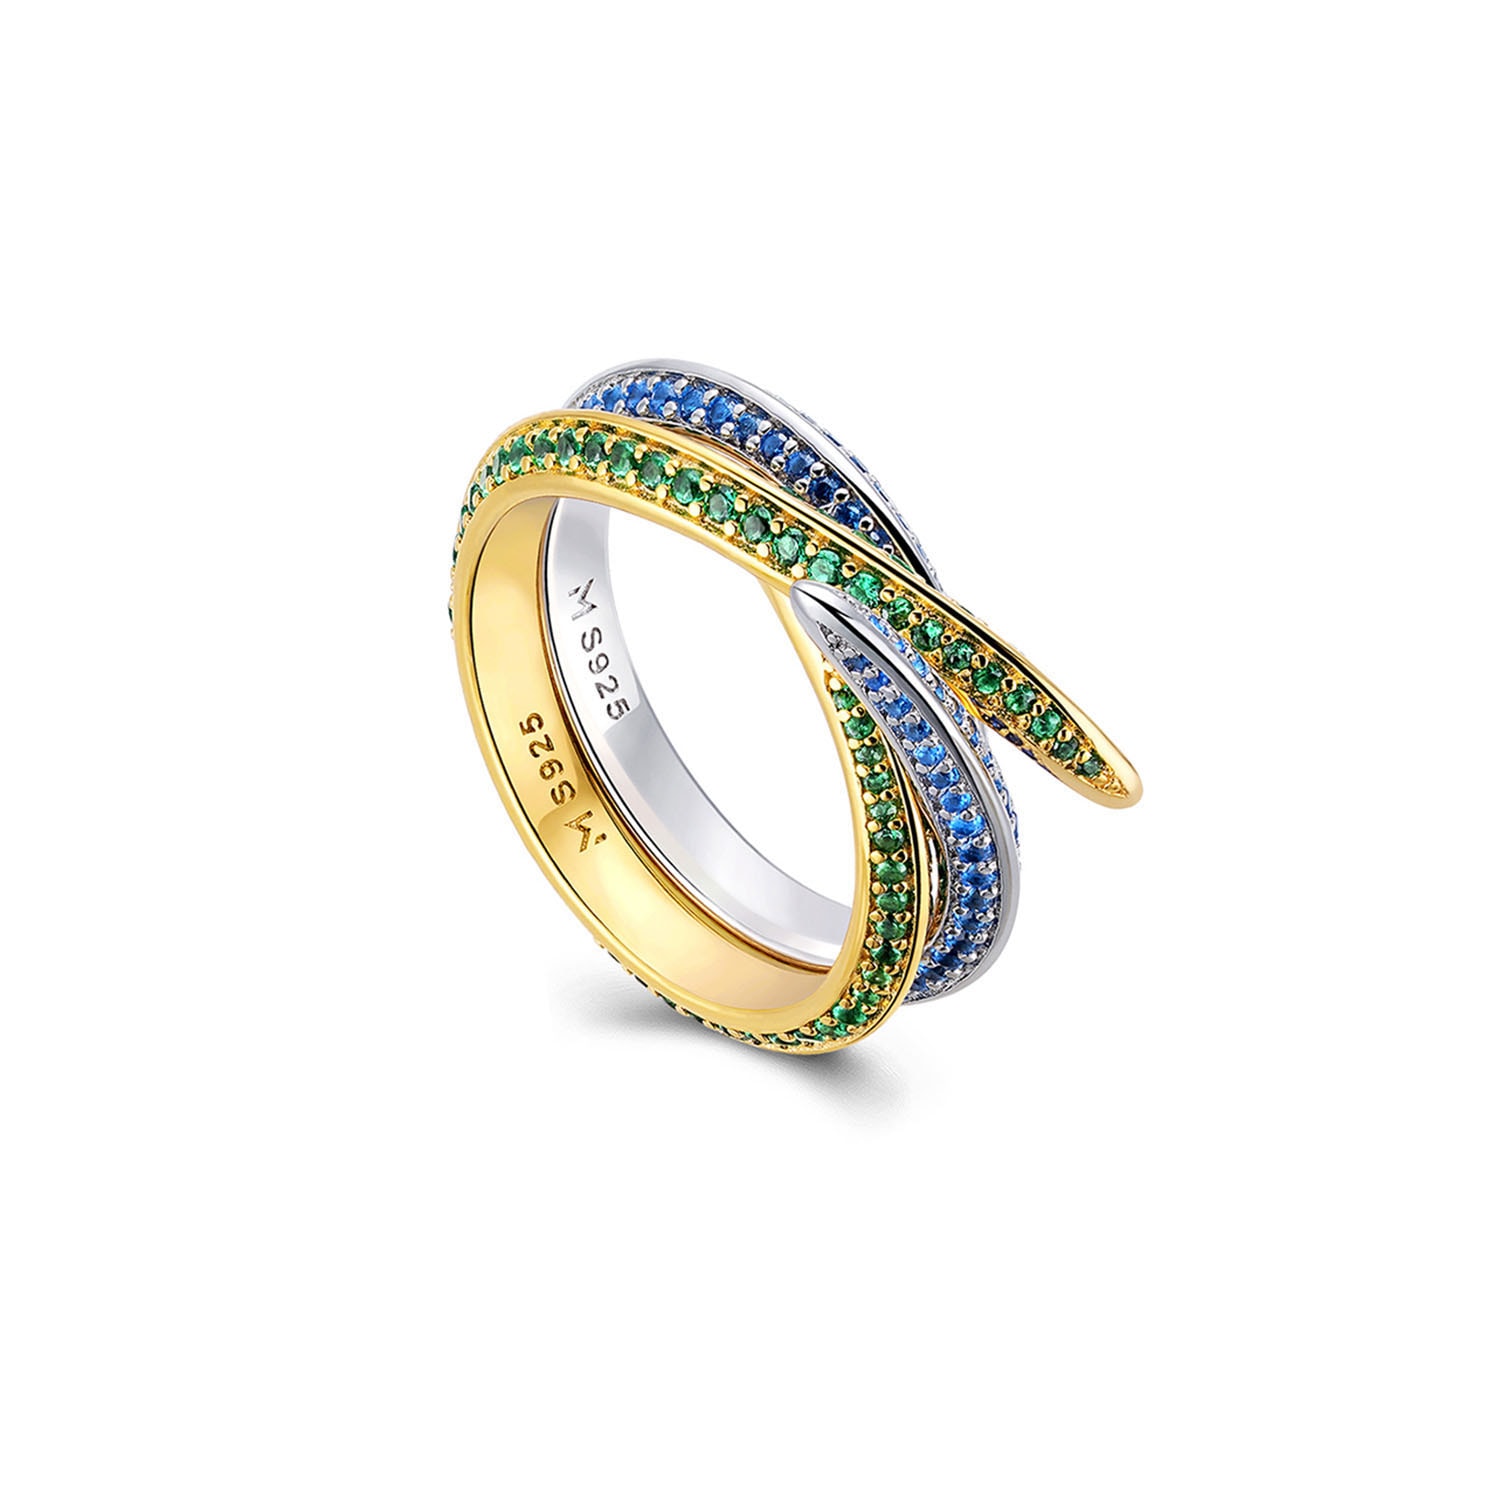 Meulien Women's Silver / Blue Pointed Curve Ring - Silver, Blue Stone In Gold